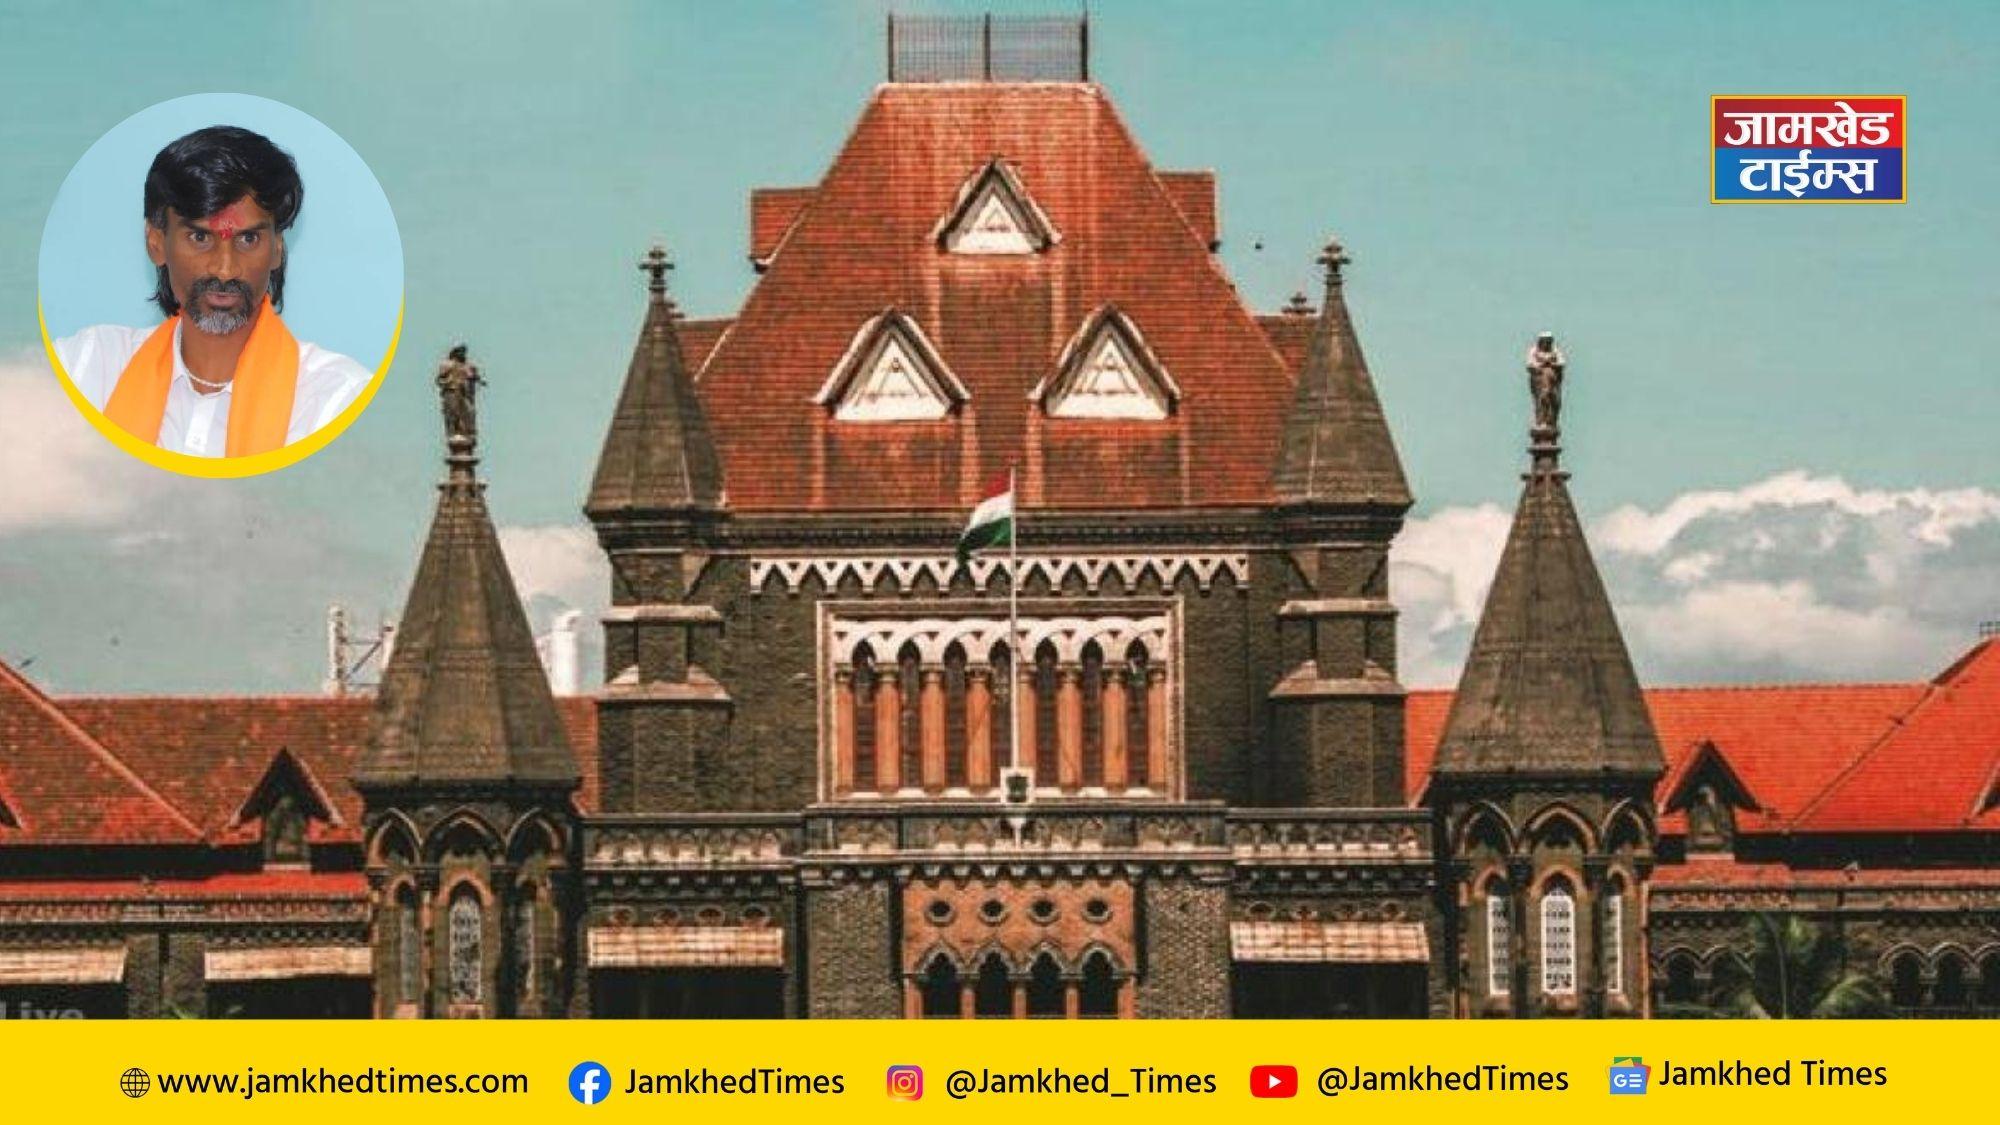 big news, Bombay High Court issued notice to Manoj Jarange Patil, what is the actual case? Find out!